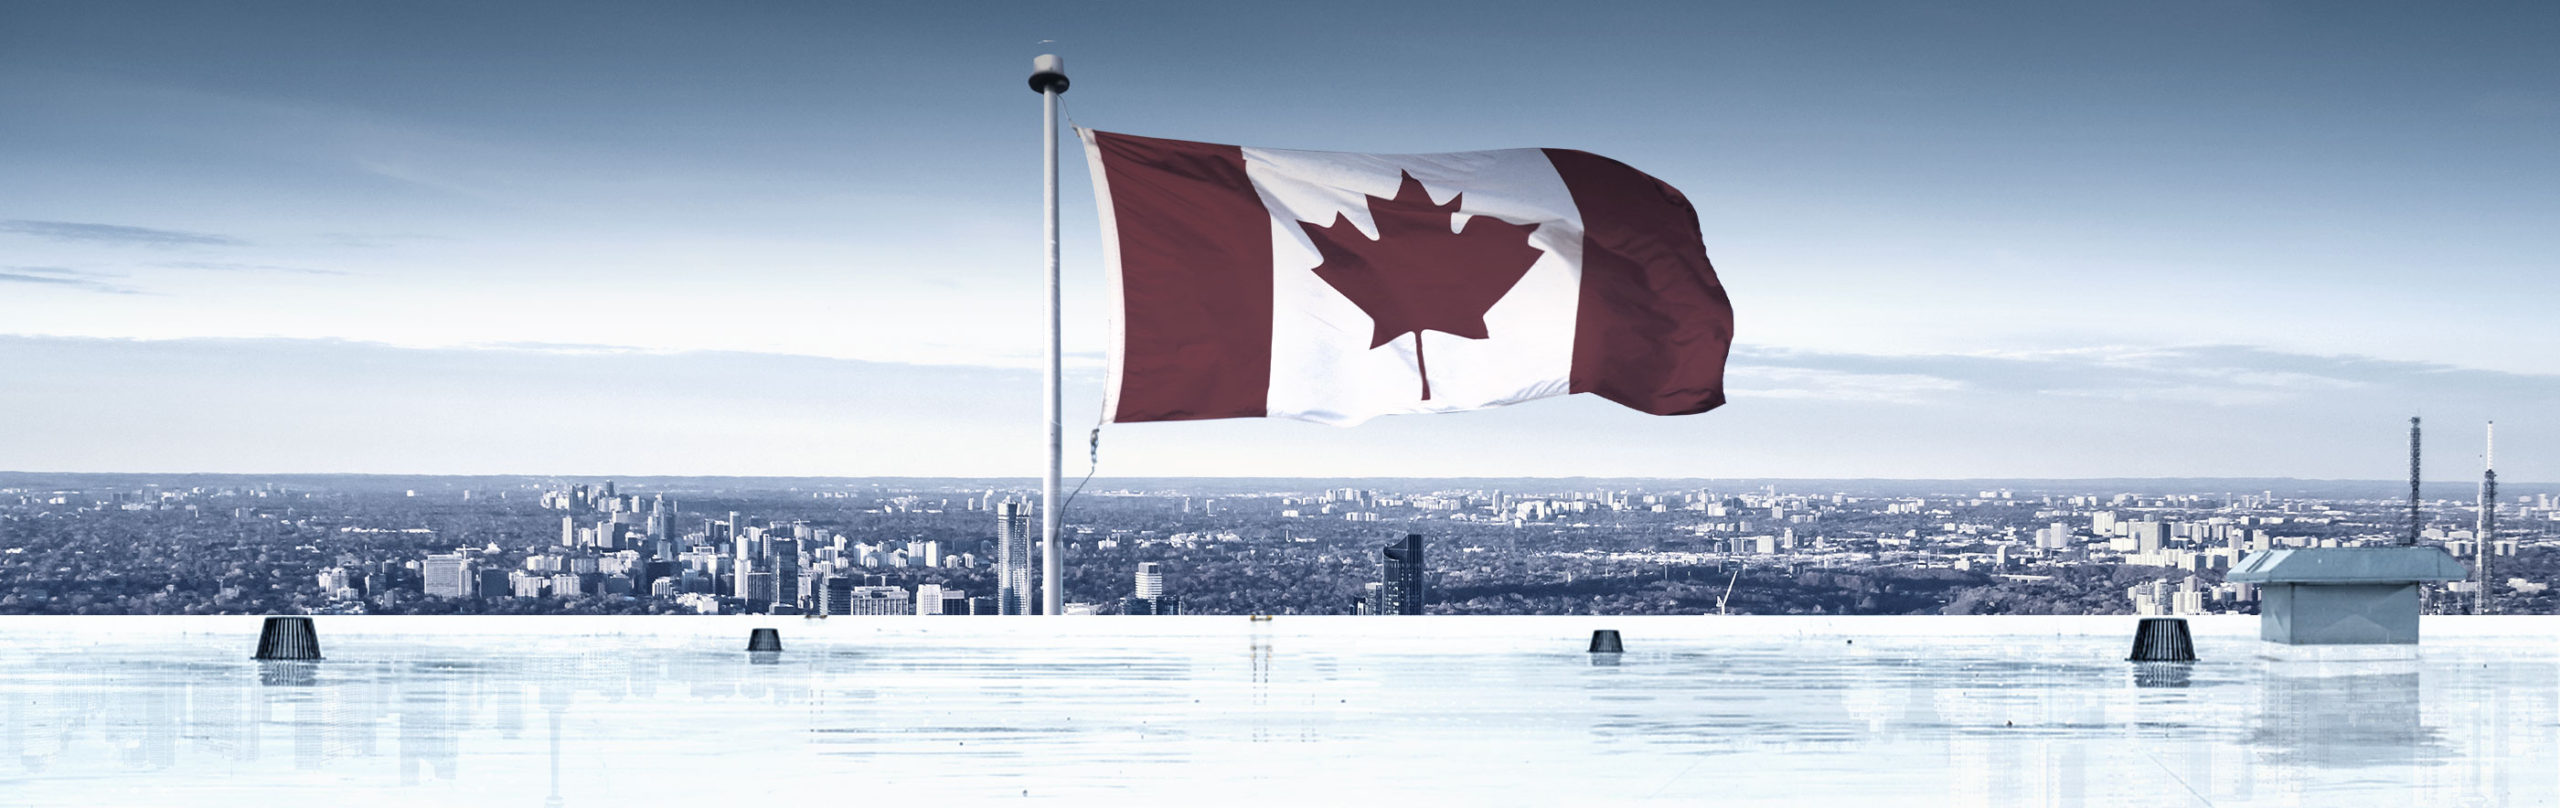 Rooftop view of waving Canada flag with cityscape in background